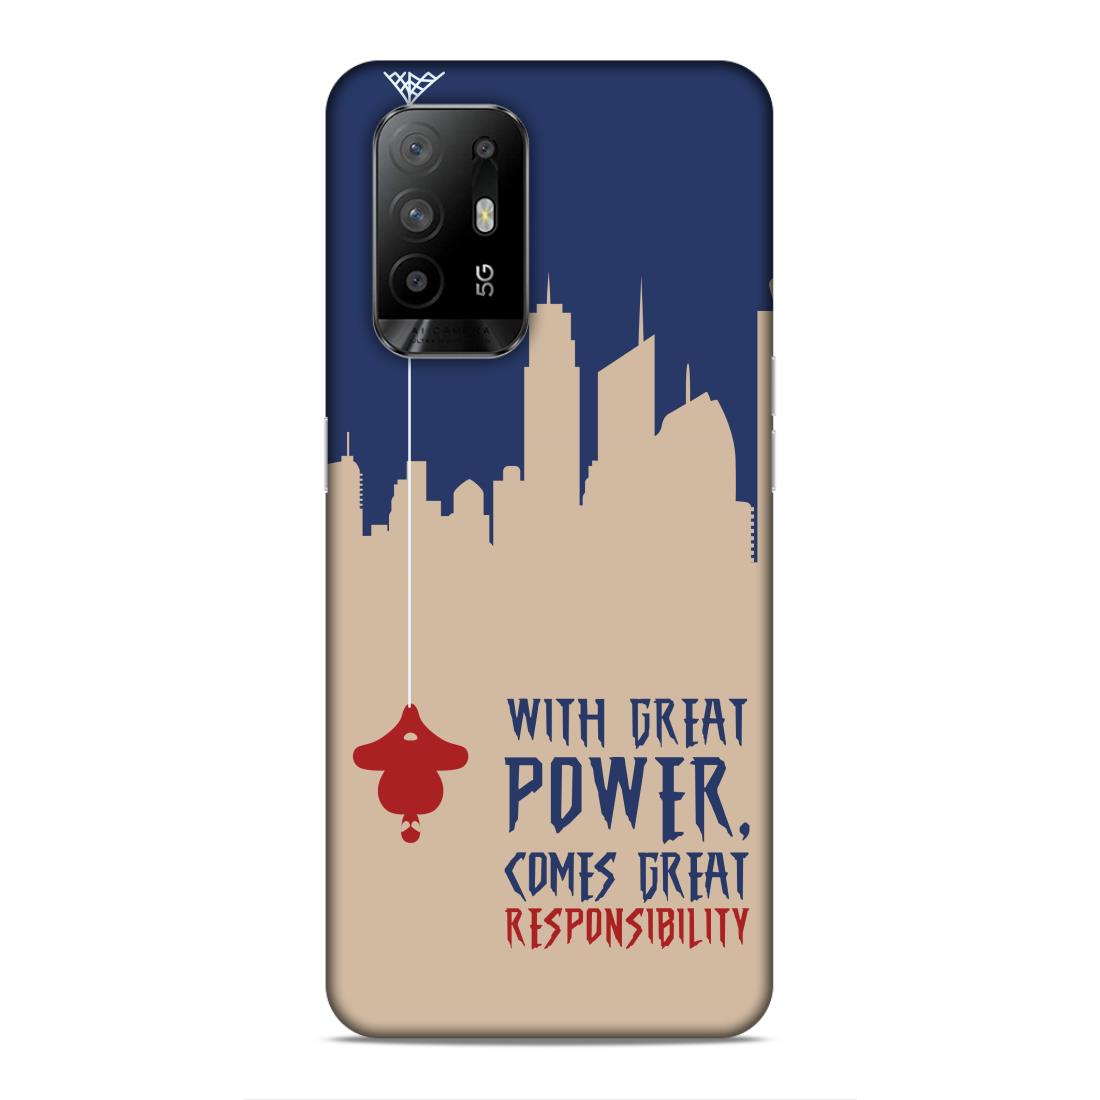 Great Power Comes Great Responsibility Hard Back Case For Oppo F19 Pro Plus